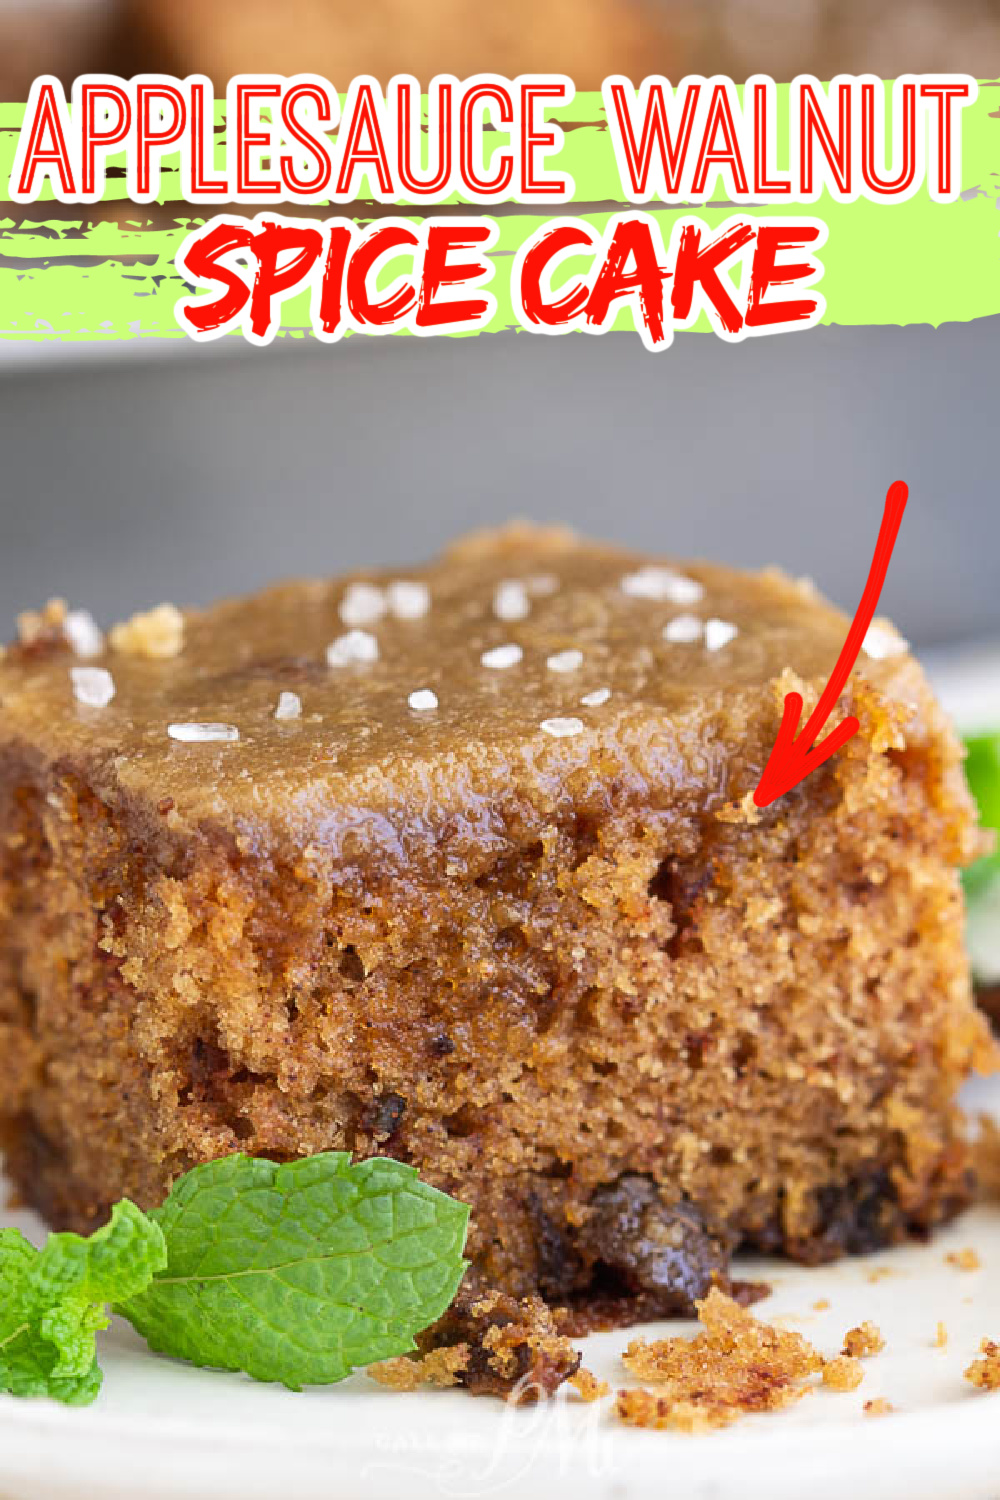 Martha Stewart - Happy National Applesauce Cake Day! Applesauce is what  makes this cake exceptionally moist. It's delicious on its own or served  with a scoop of vanilla ice cream: http://martha.ms/61888lM6M |